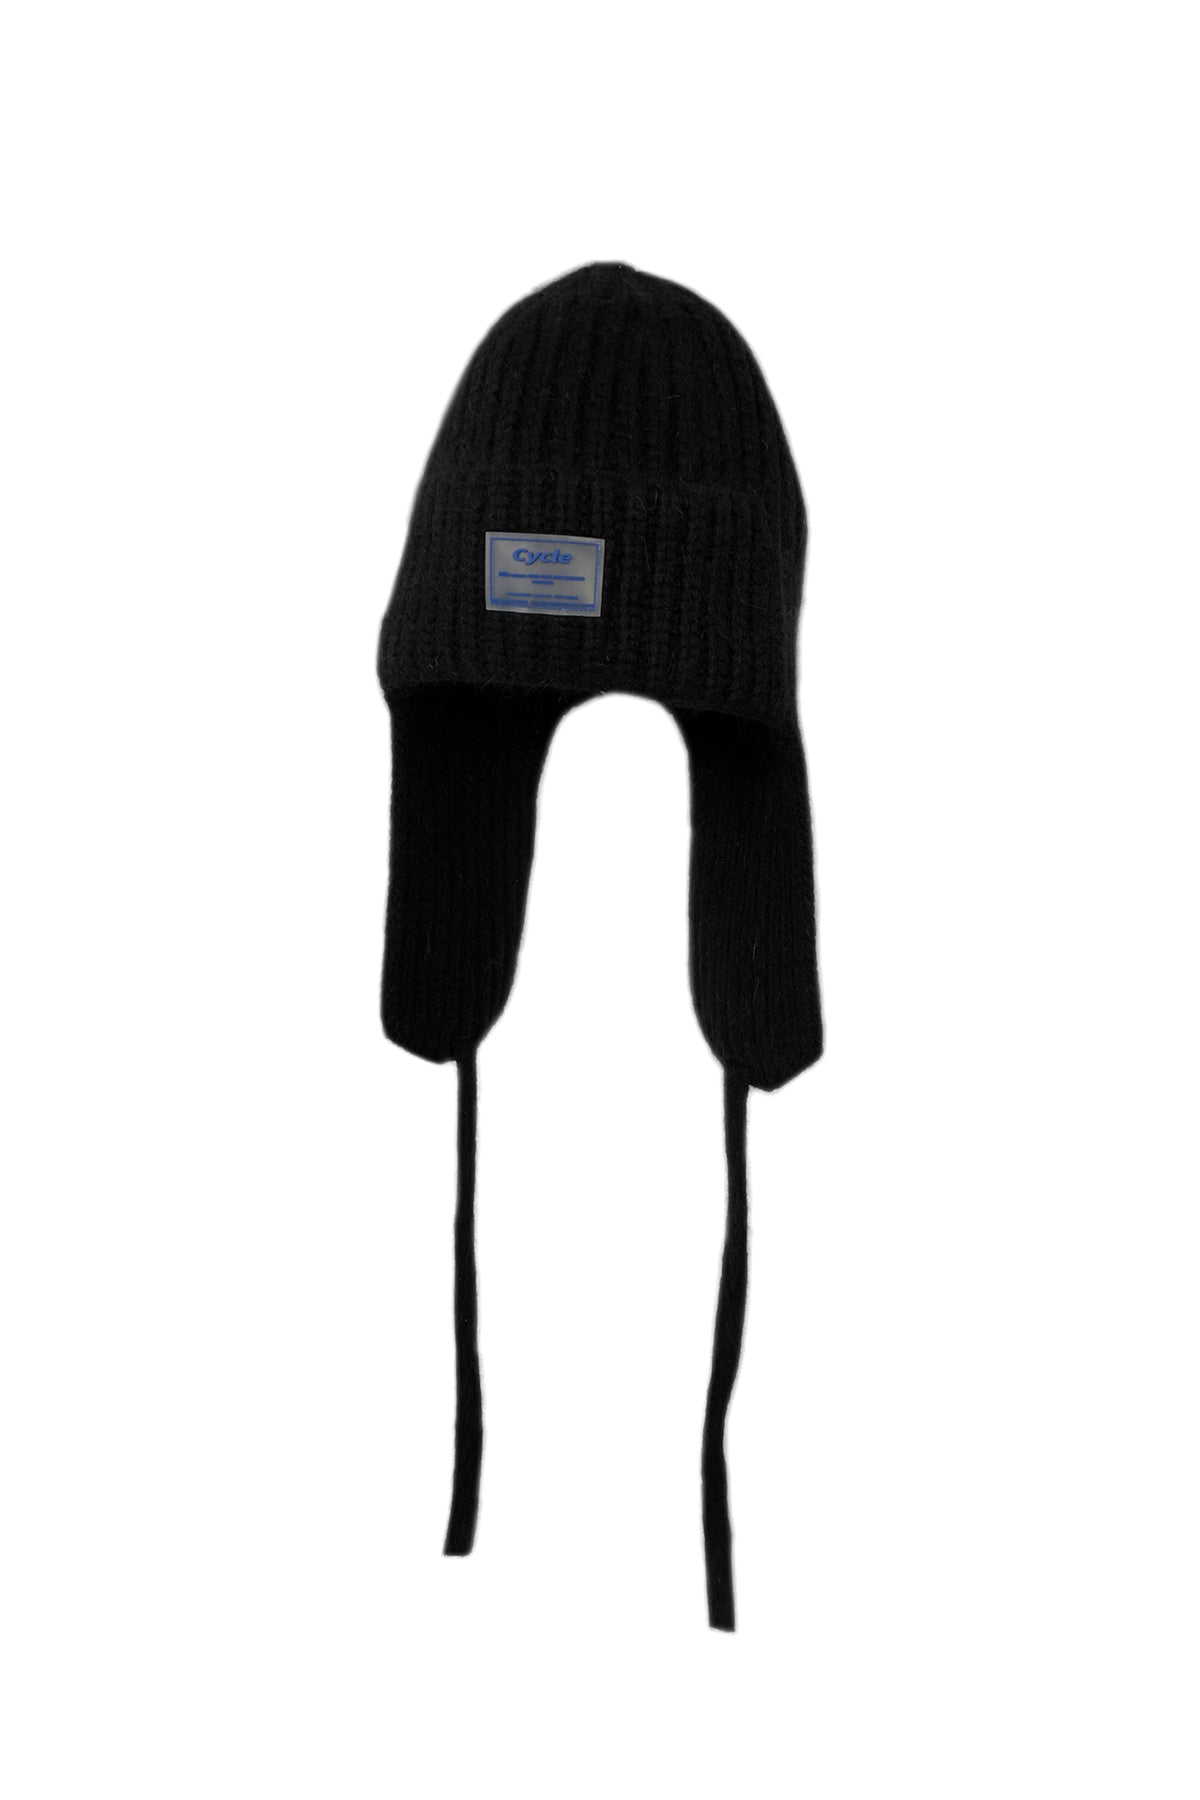 PRE-ORDER】CYCLE DRAW CODE MOHAIR KNIT CAP -BLACK- – Cycle by myob